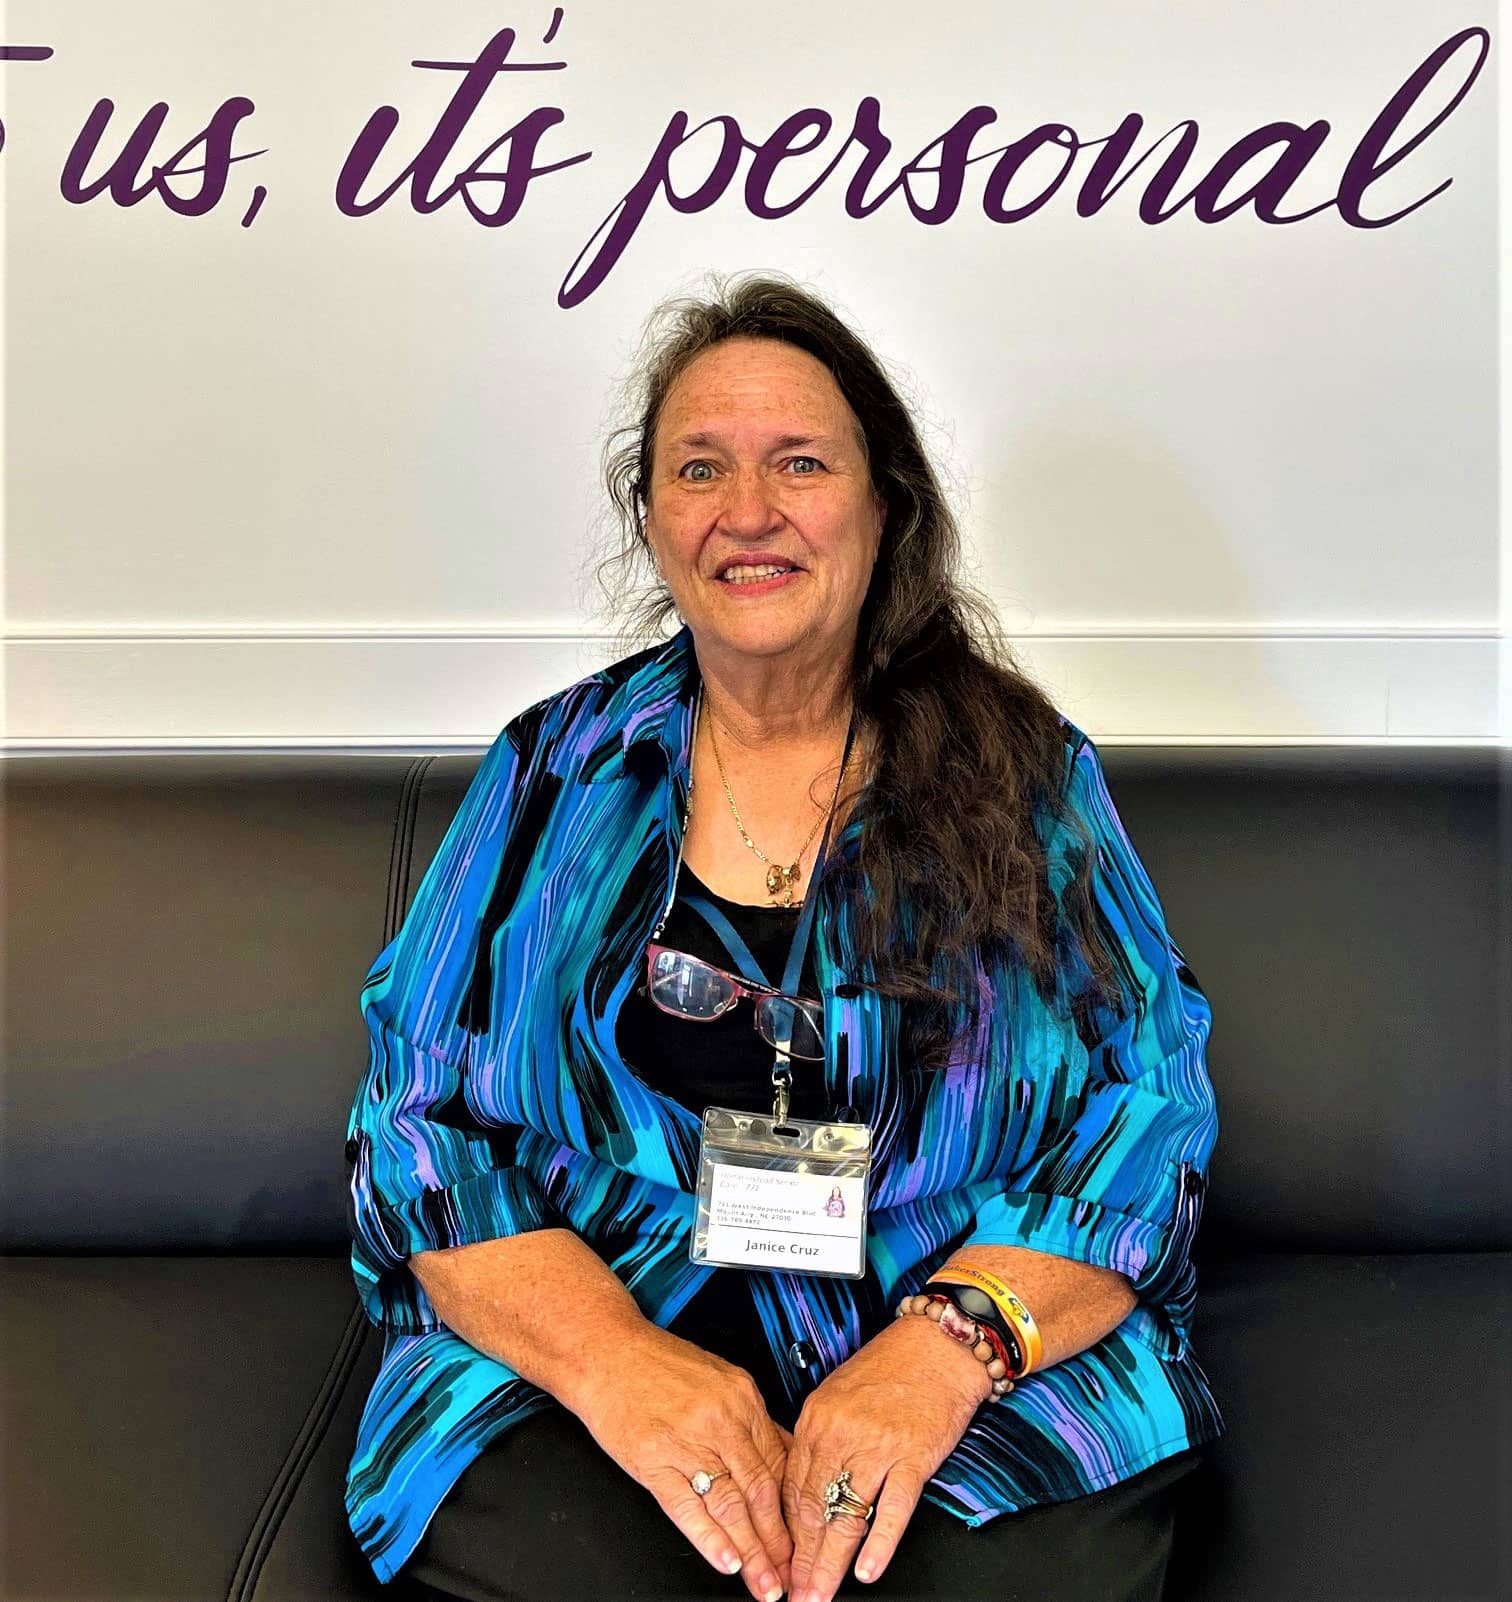 Janice Cruz, August 2021 Caregiver of the month